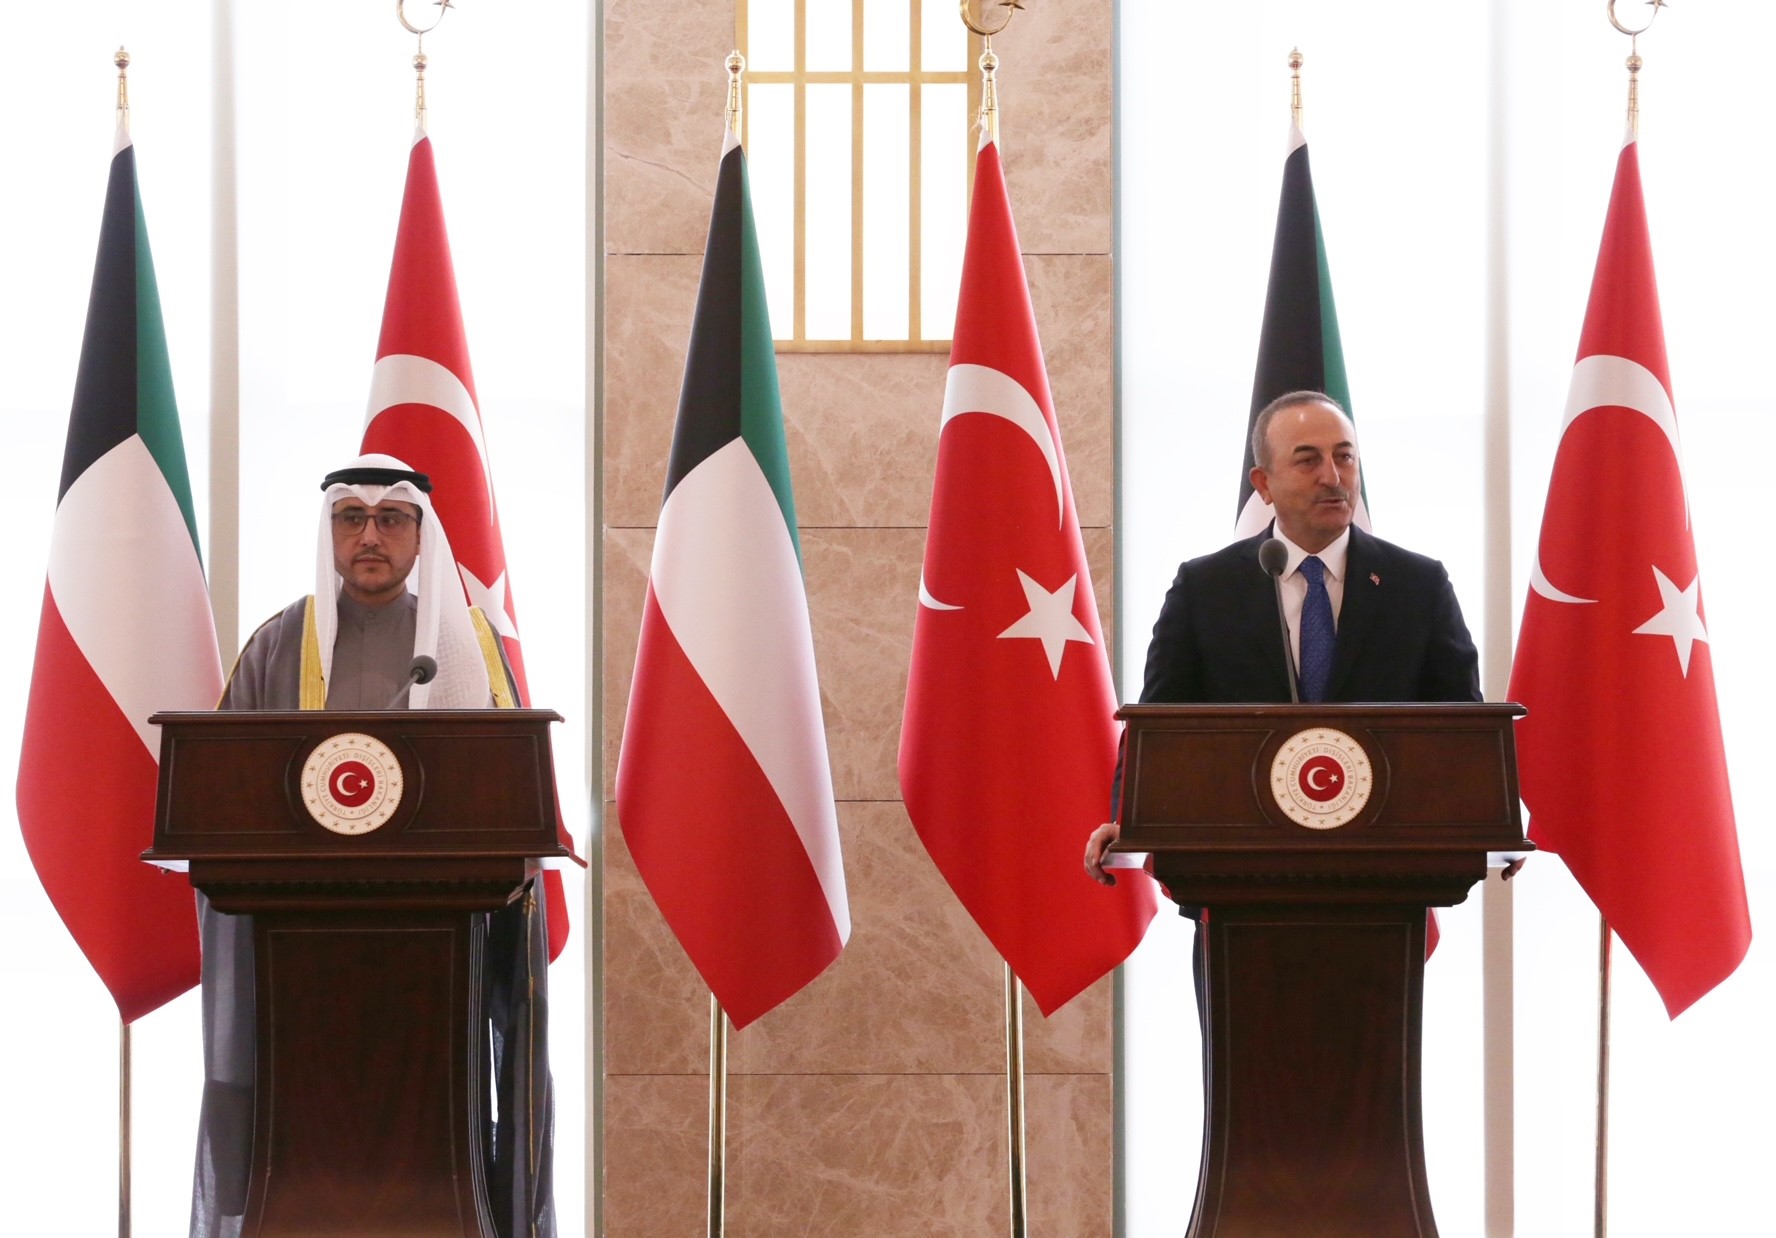 Foreign Minister Sheikh Dr. Ahmad Nasser Al-Mohammad Al-Sabah in the joint press conference with his Turkish counterpart Mevlut Cavusoglu